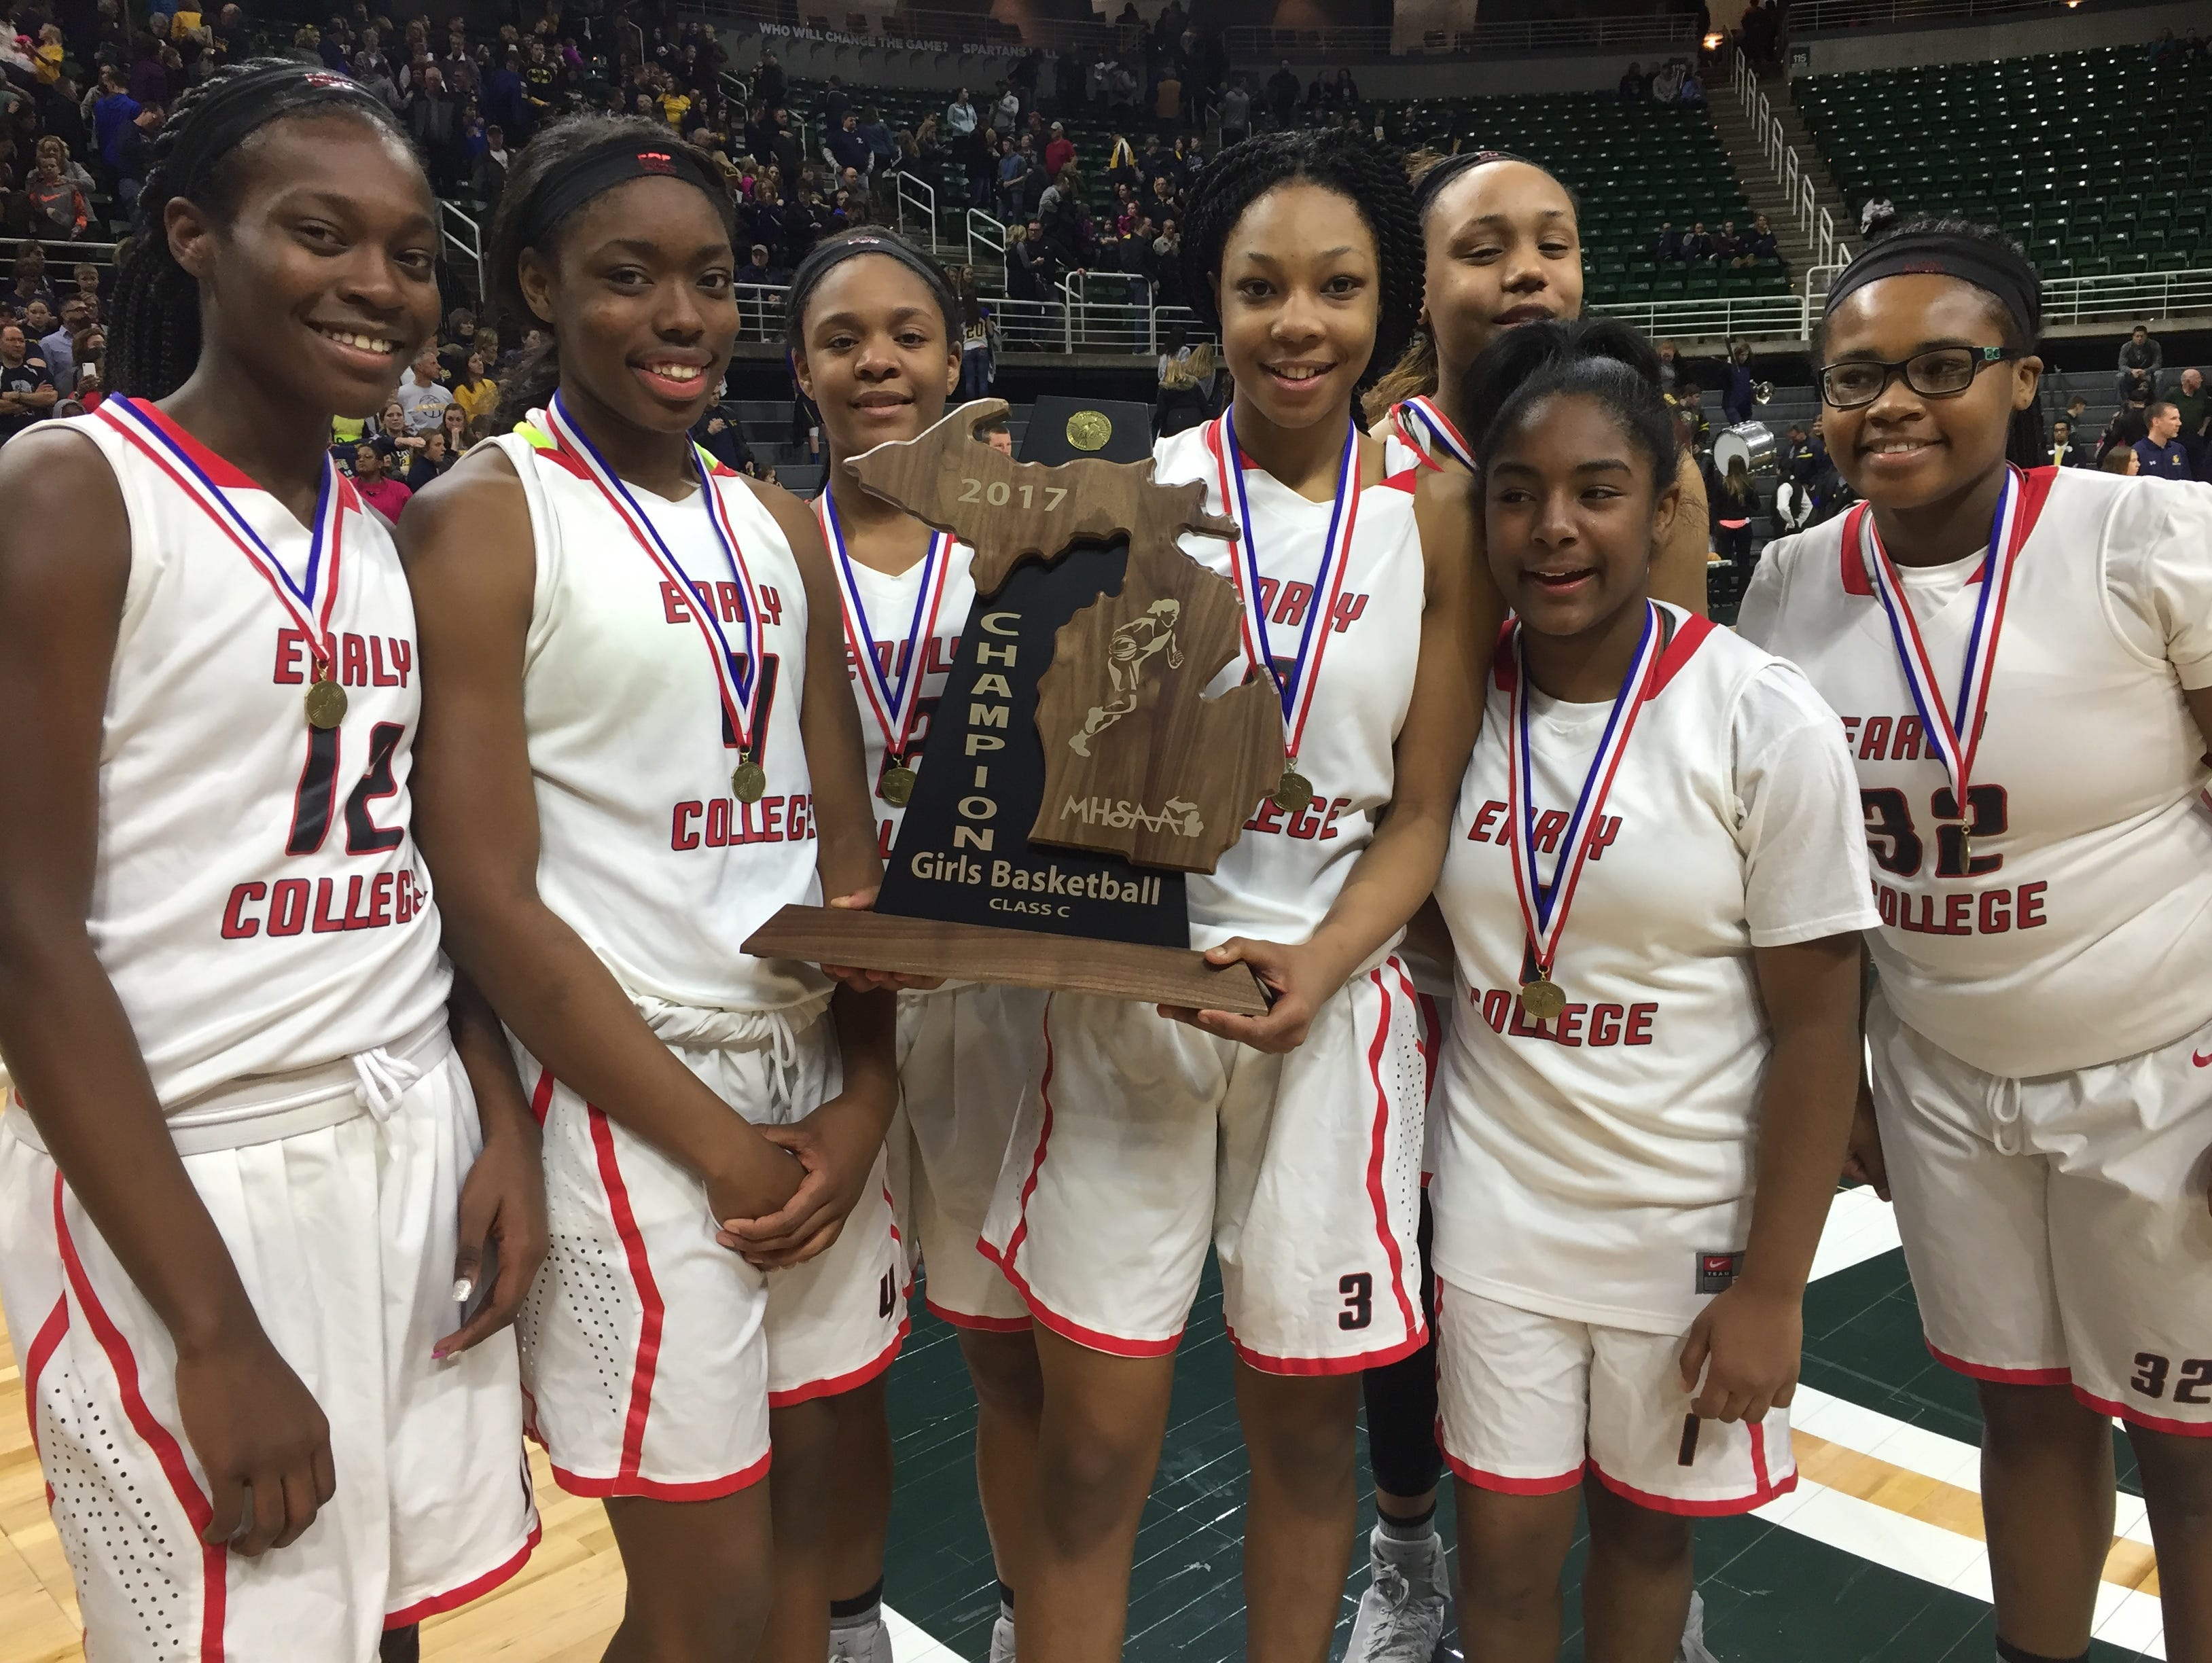 Detroit Edison freshman Gabrielle Elliott, joined by teammates, holds the Class C girls basketball state trophy after her team's 46-44 win over Pewamo-Westphalia at the Breslin Center on Saturday, March 18.